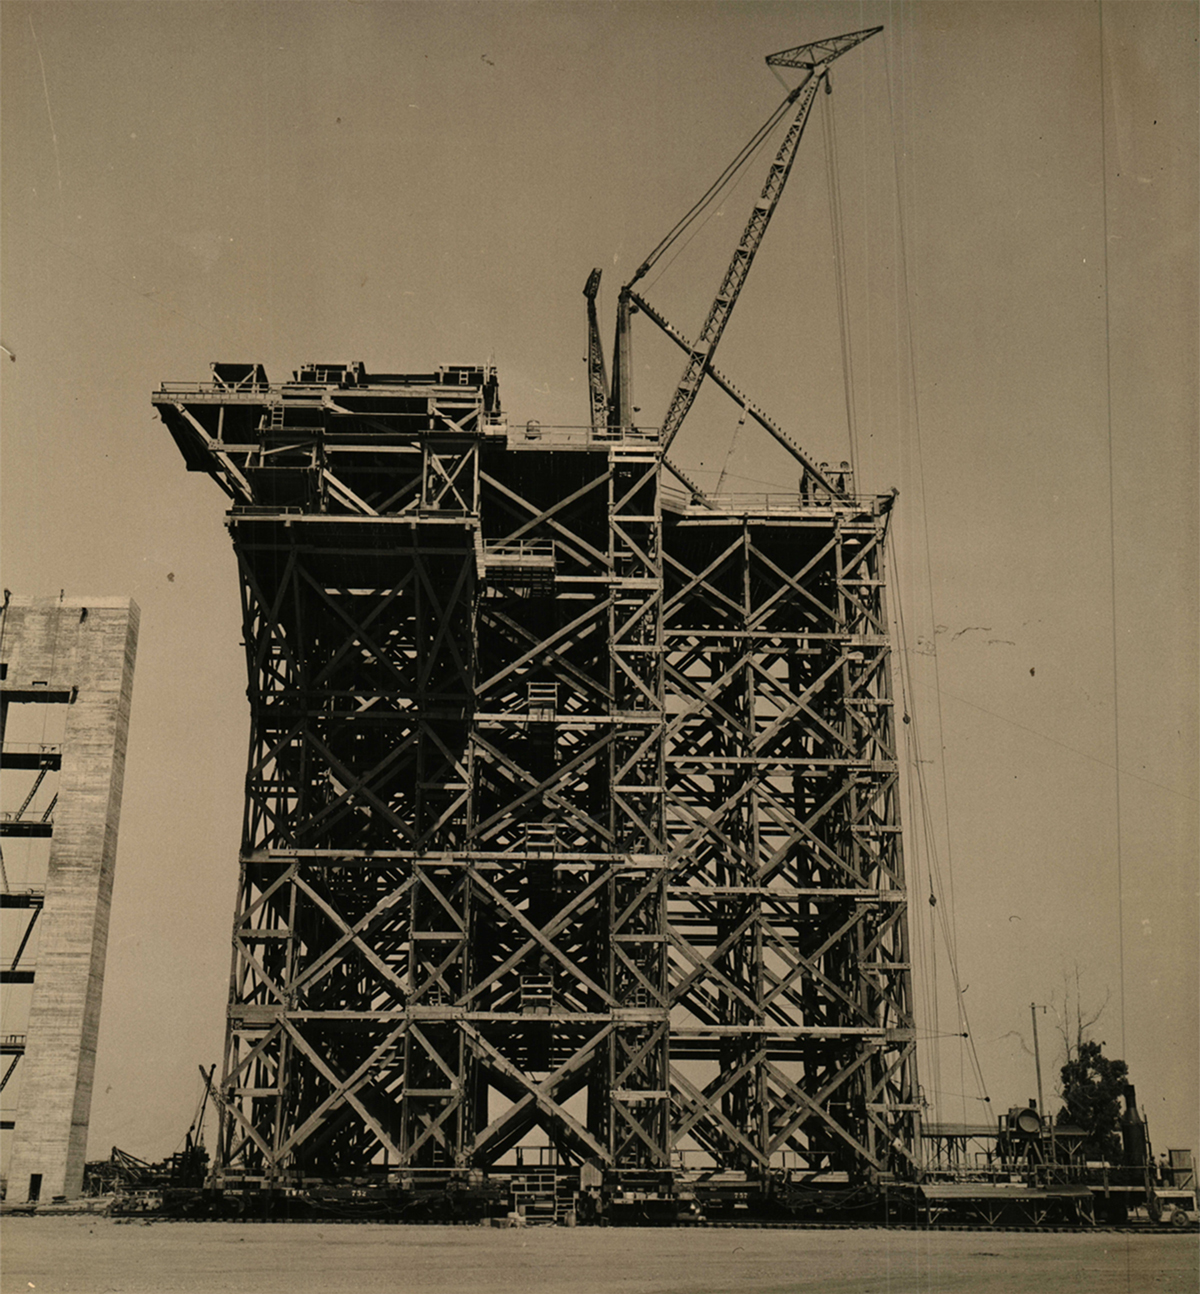 A tall and wide movable scaffolding tower with a construction crane on top used to assemble the wood trusses for Hangars 2 and 3.